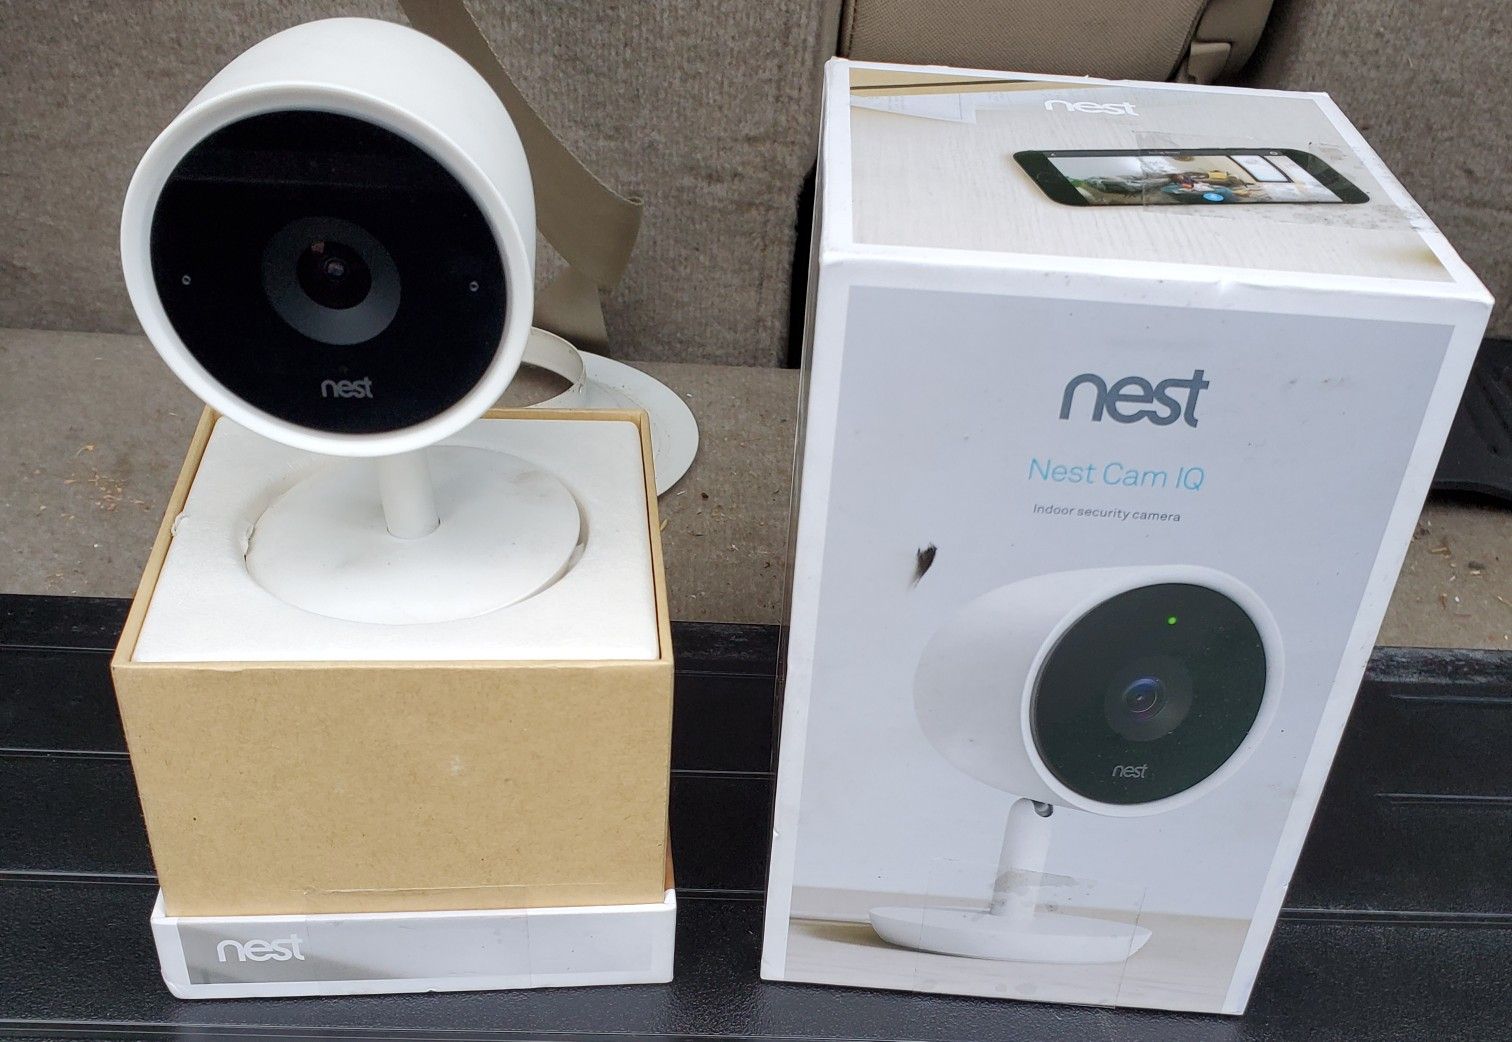 Need gone now, 399 brand new I'll do 120 if u make it fast, Almost new nest cam IQ, one of the best on the market, needs new 13 dollar charger cable